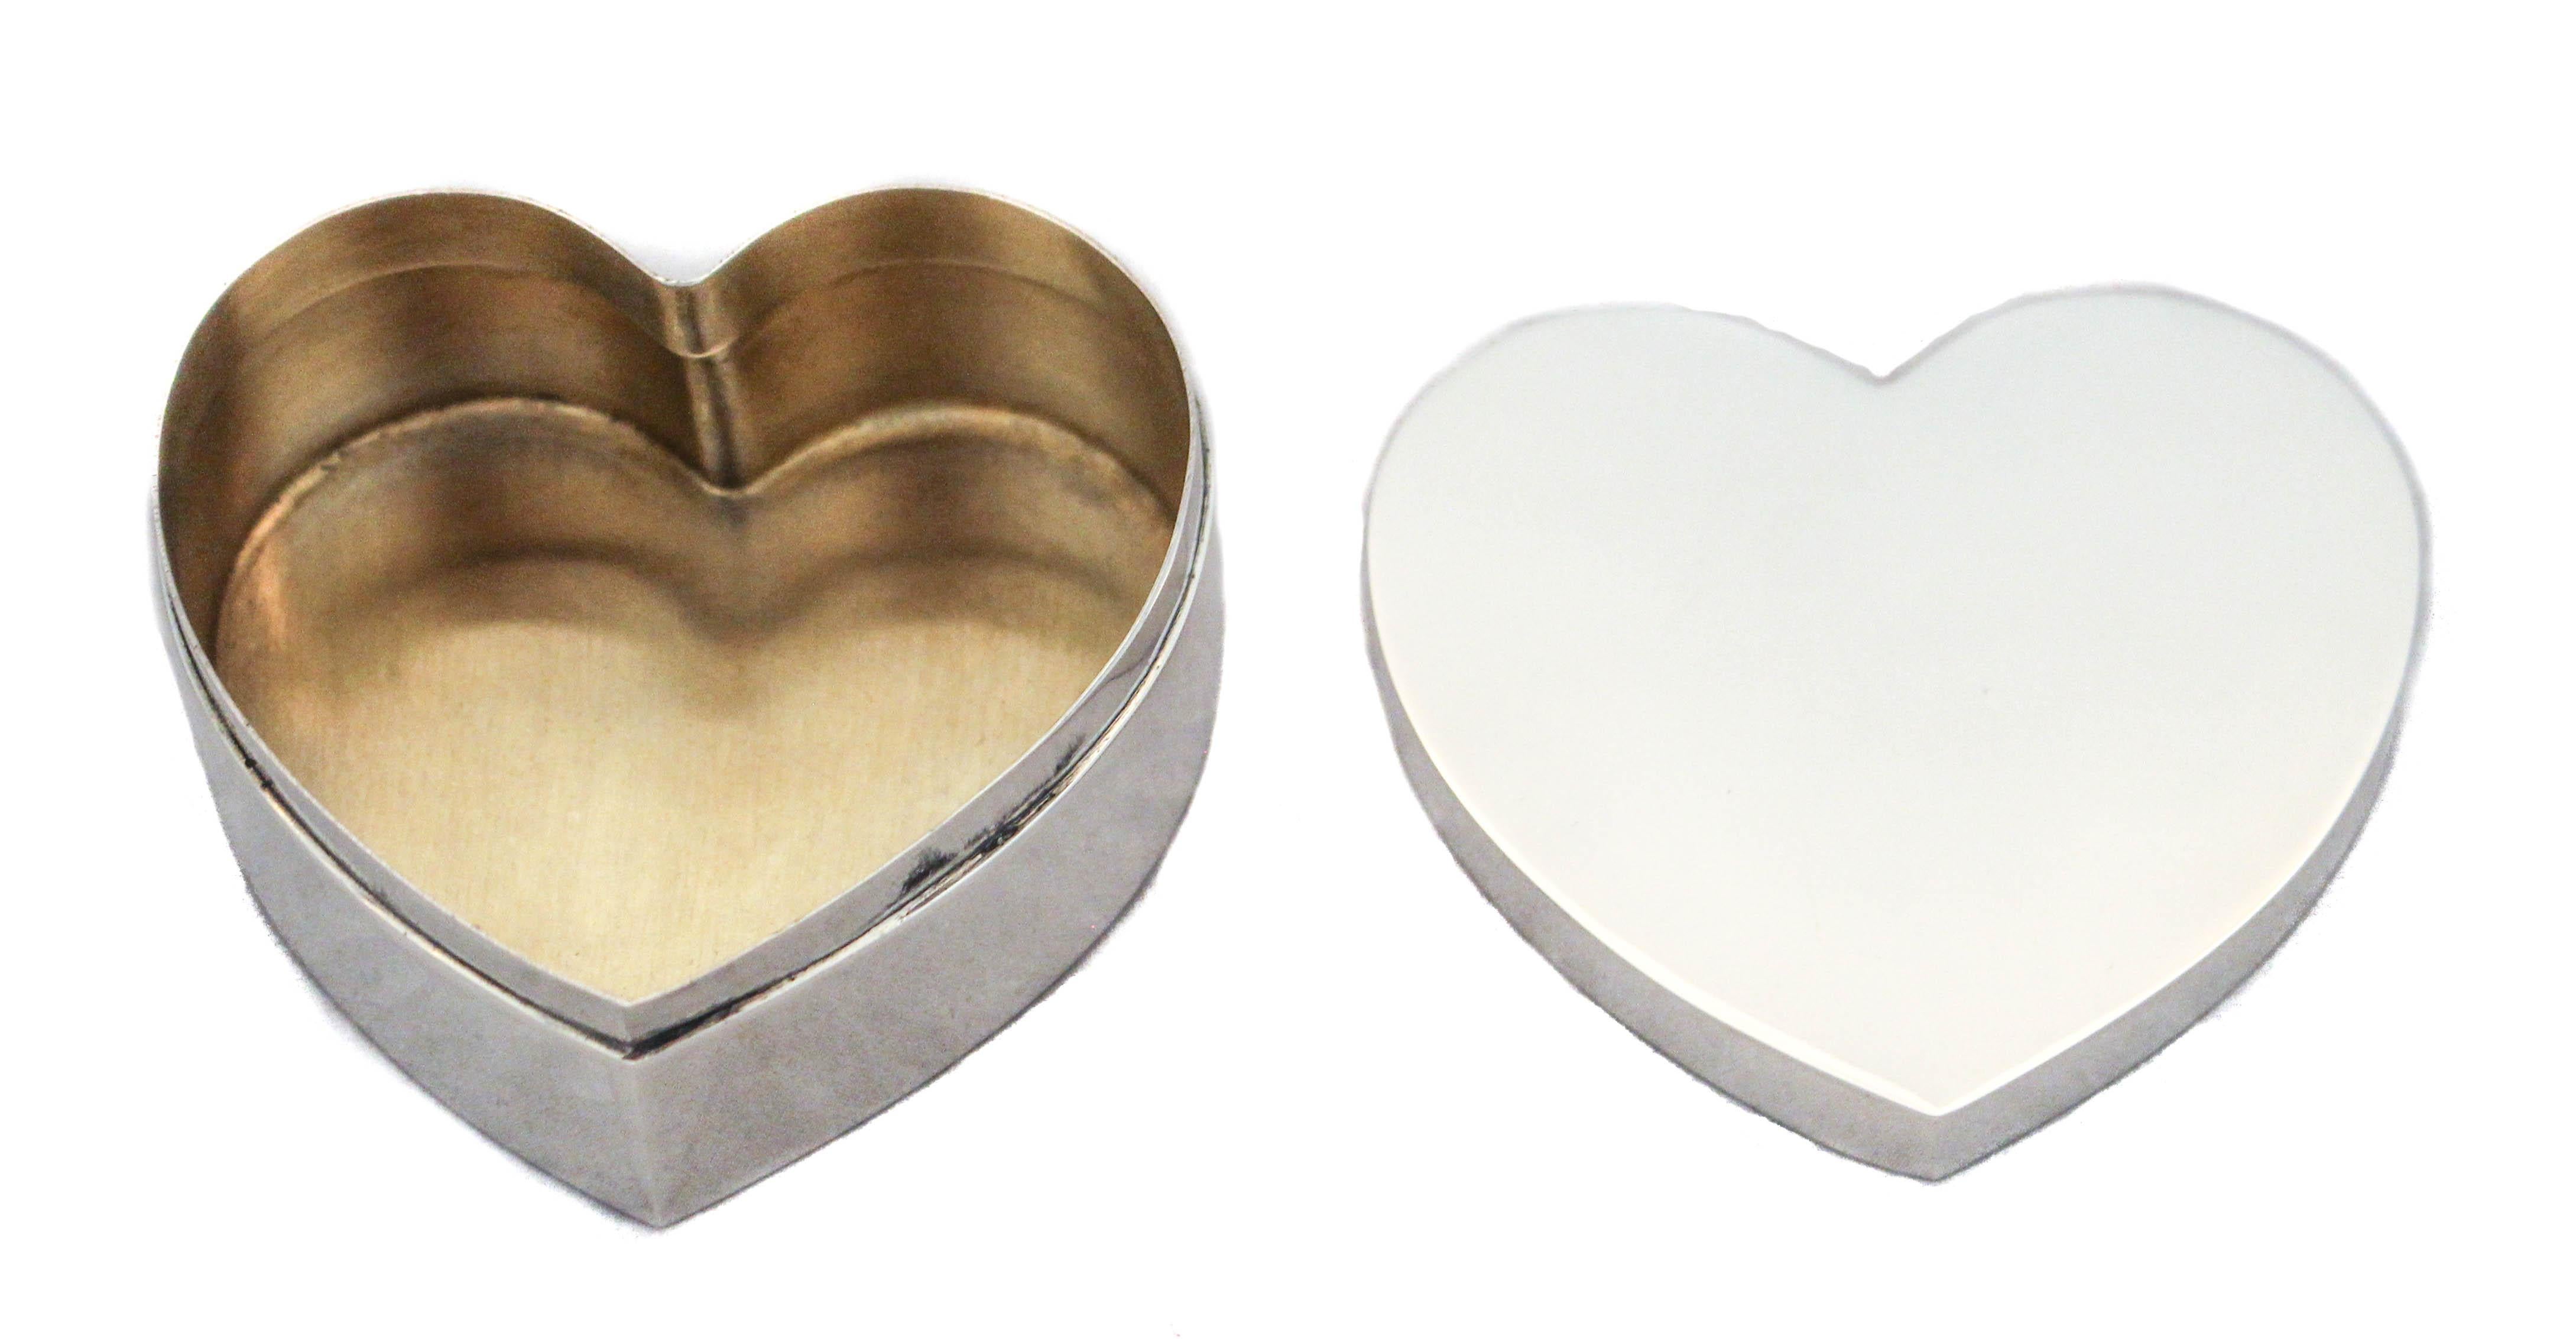 Love is in the air with this Tiffany and Co sterling silver heart box. A quintessential Mid-Century feel and look; sleek and contemporary. This can be used as a jewelry box or simply as a decorative piece.